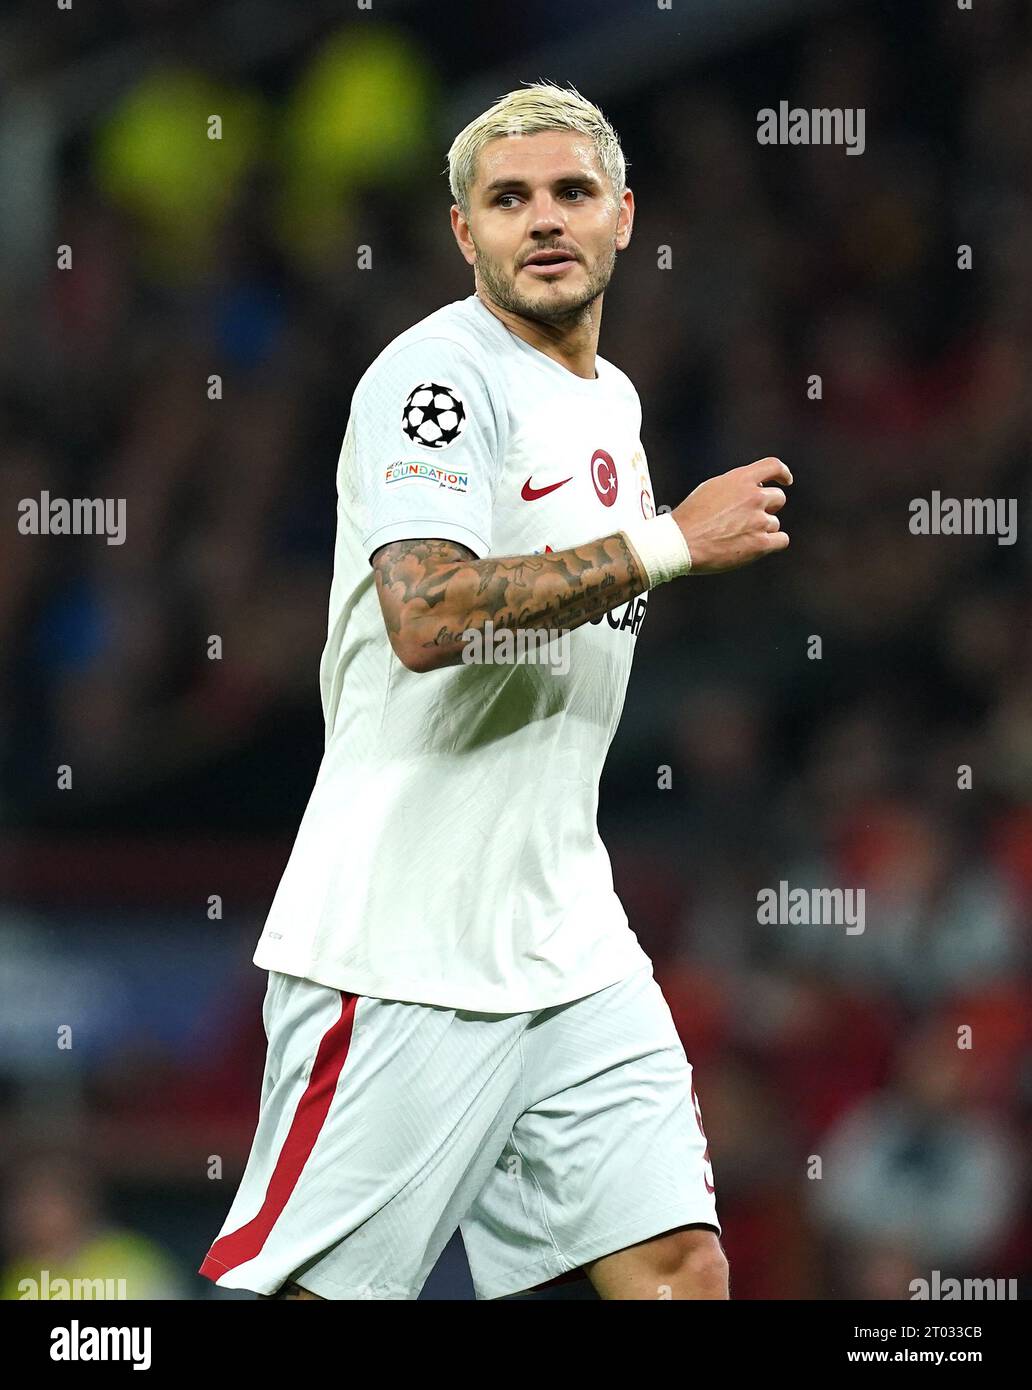 https://c8.alamy.com/comp/2T033CB/galatasarays-mauro-icardi-during-the-uefa-champions-league-group-a-match-at-old-trafford-manchester-picture-date-tuesday-october-3-2023-2T033CB.jpg